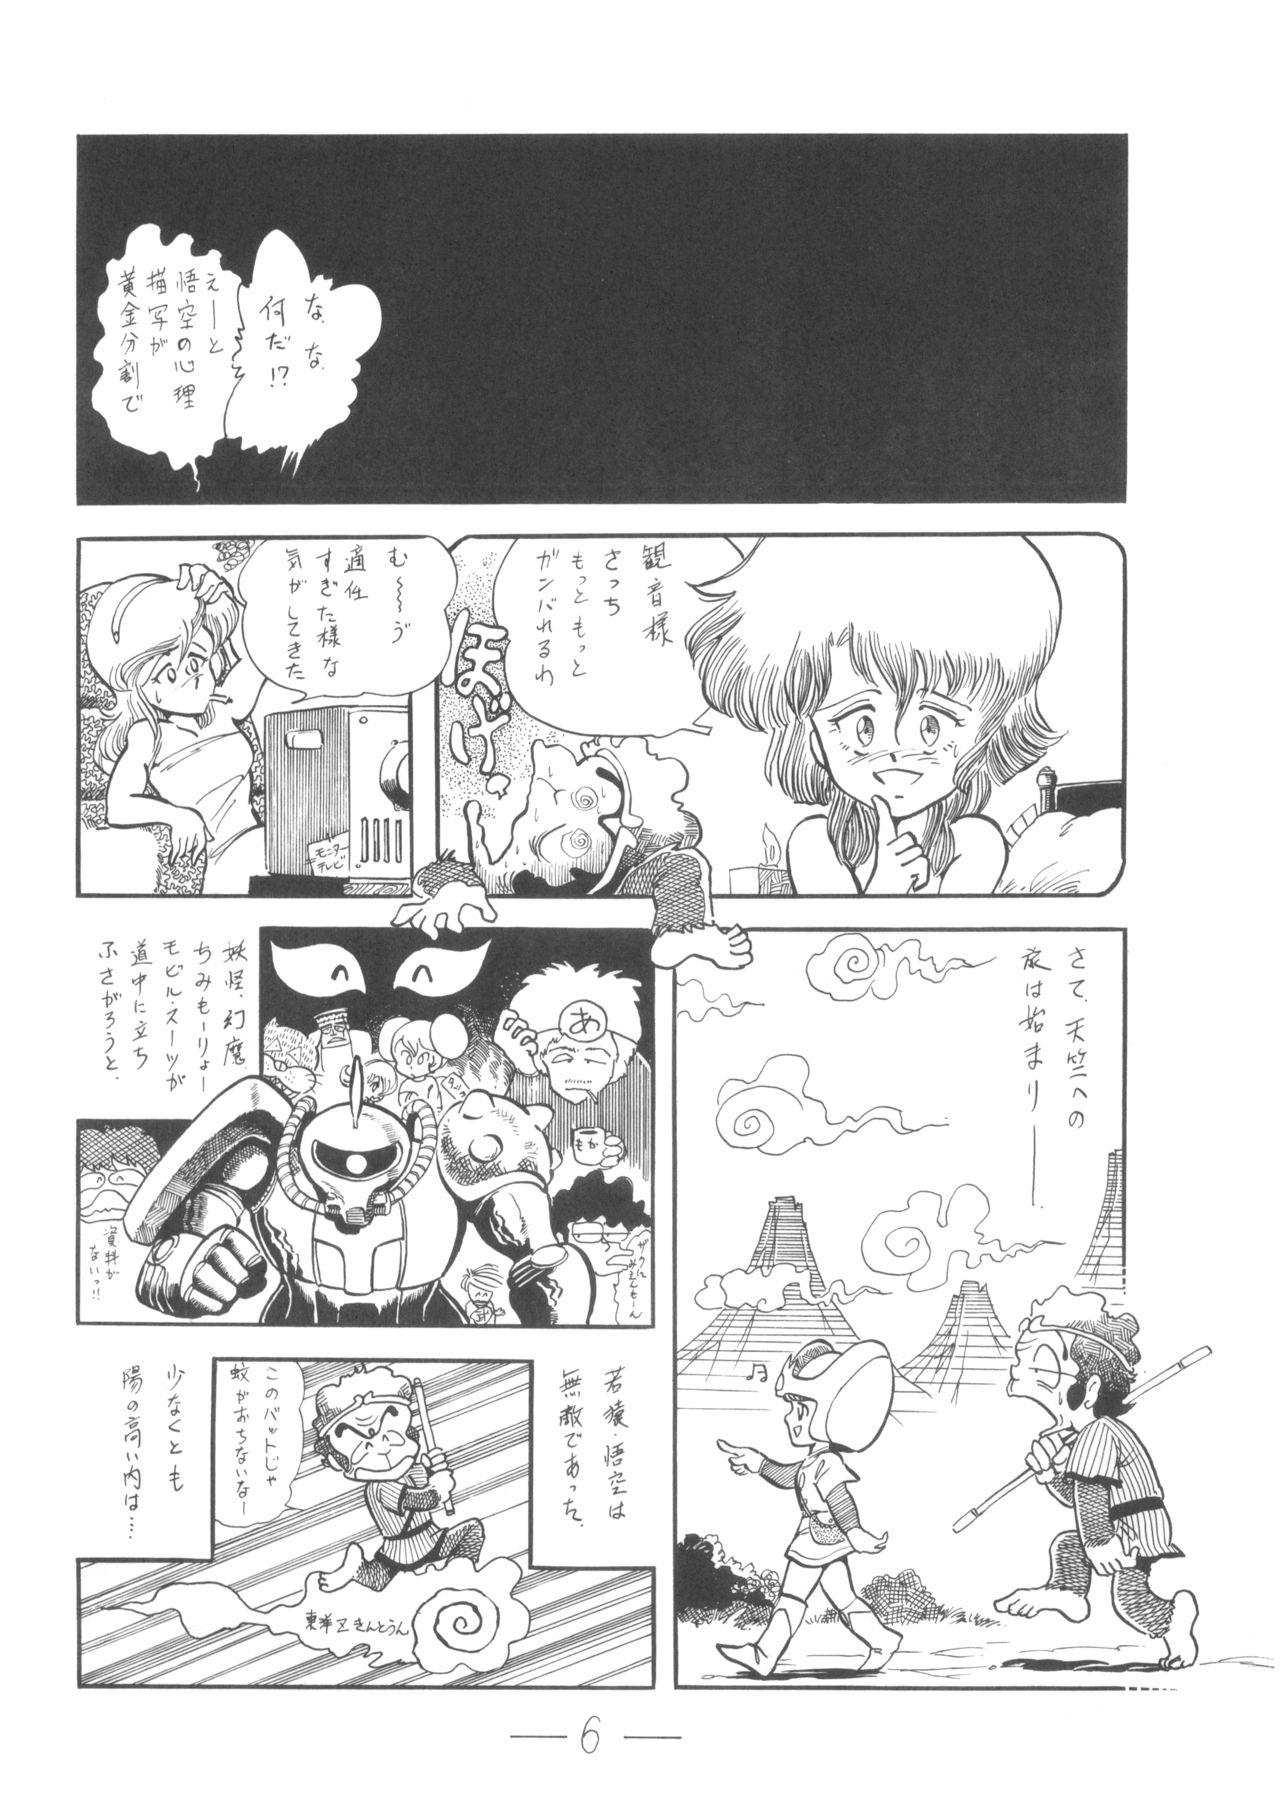 Best Blowjob Cybele Vol.6 - Dirty pair Journey to the west Freak - Page 7